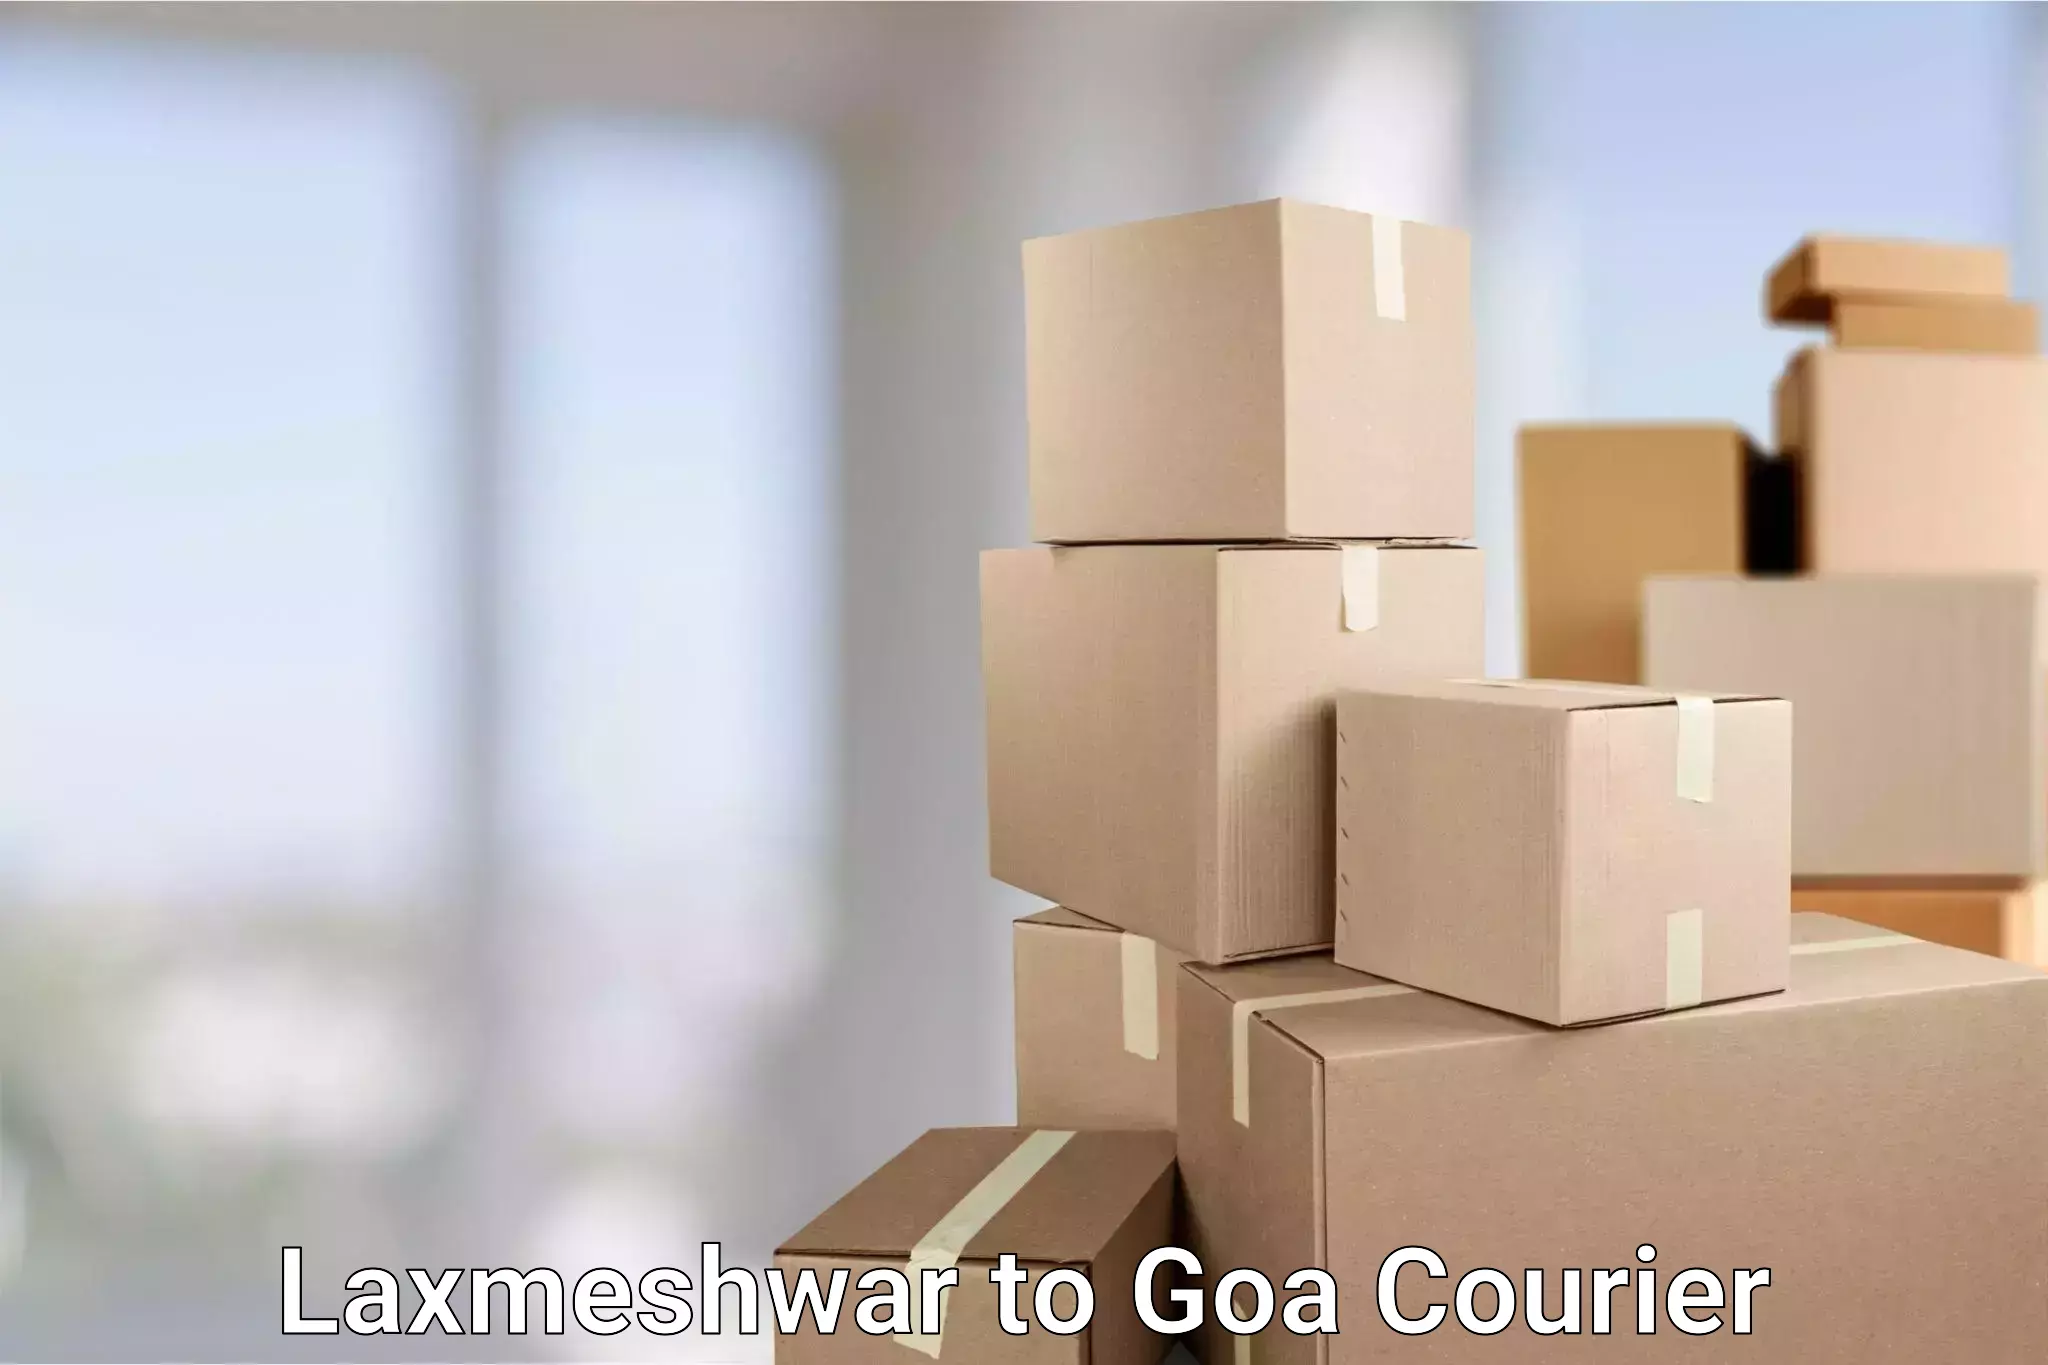 On-call courier service Laxmeshwar to Goa